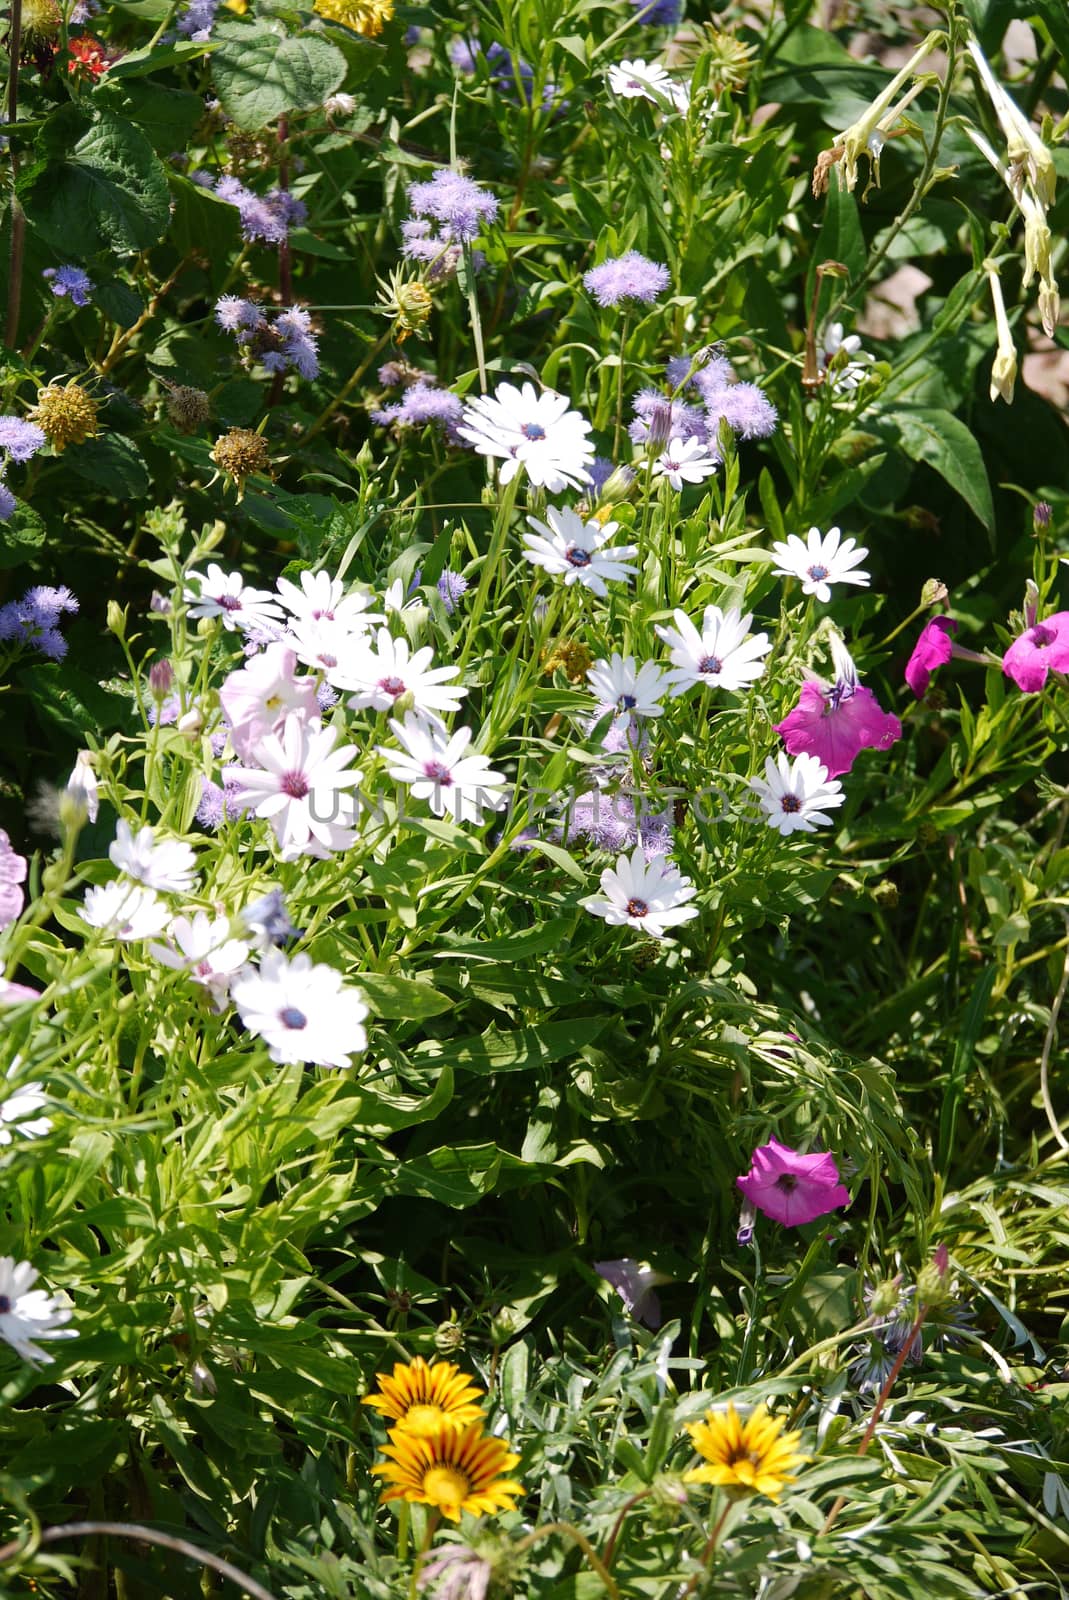 Flowerbed with lots of white, pink and orange flowers on a background of green grass